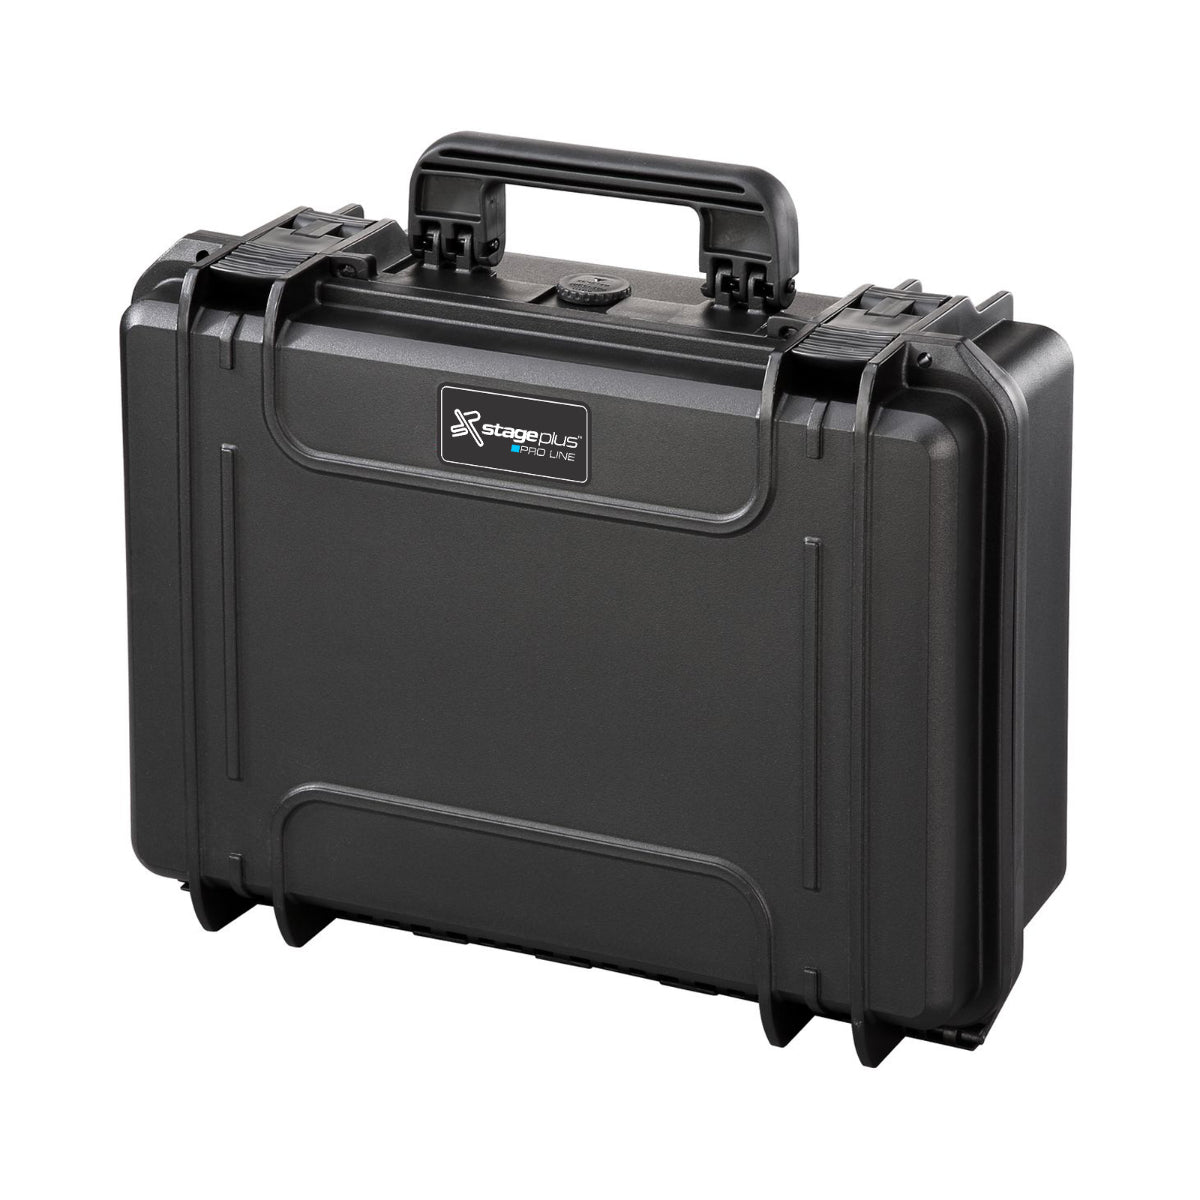 SP PRO 430CAMORG Black Carry Case, Padded Dividers + Lid Organizer, ID: L426xW290xH159mm